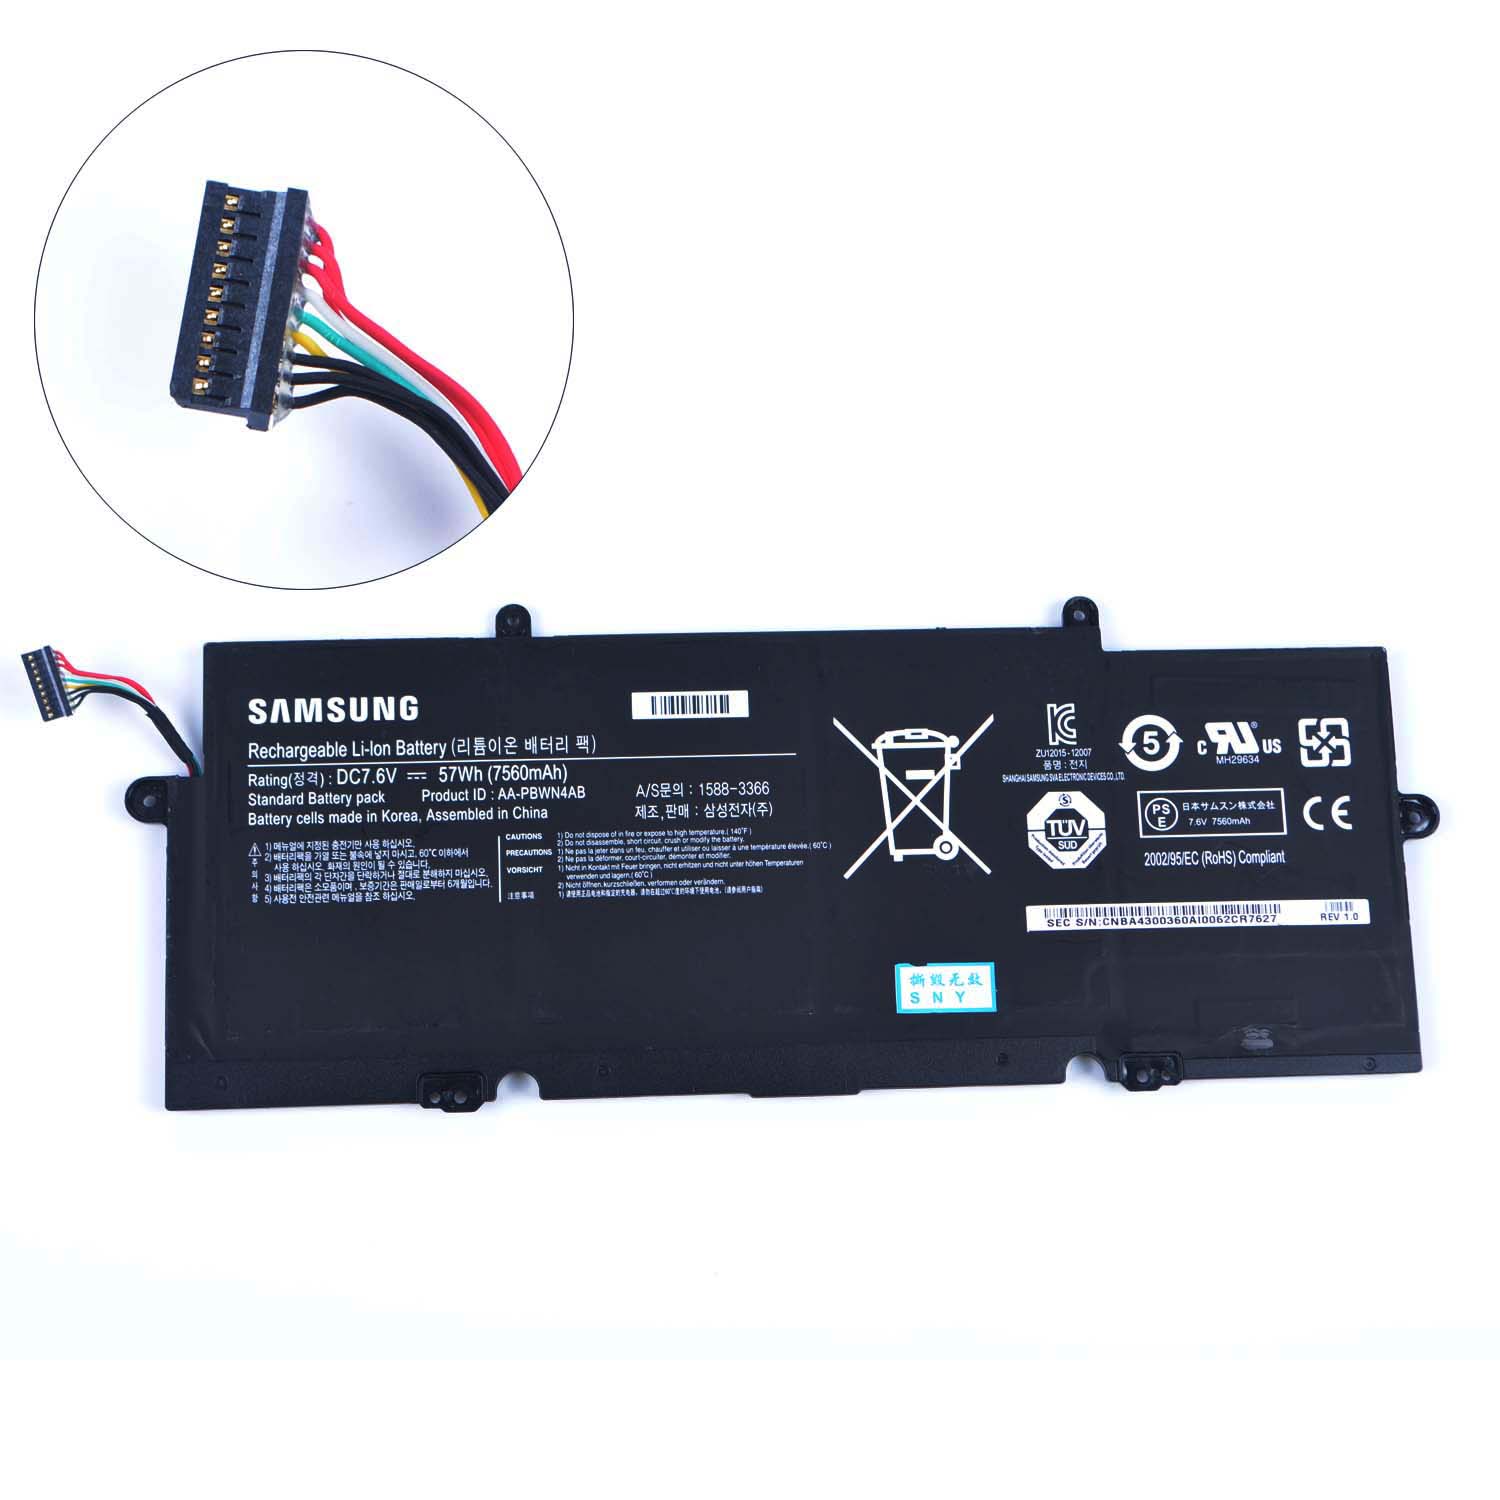 Replacement Battery for Samsung Samsung 730U3E-K01 battery